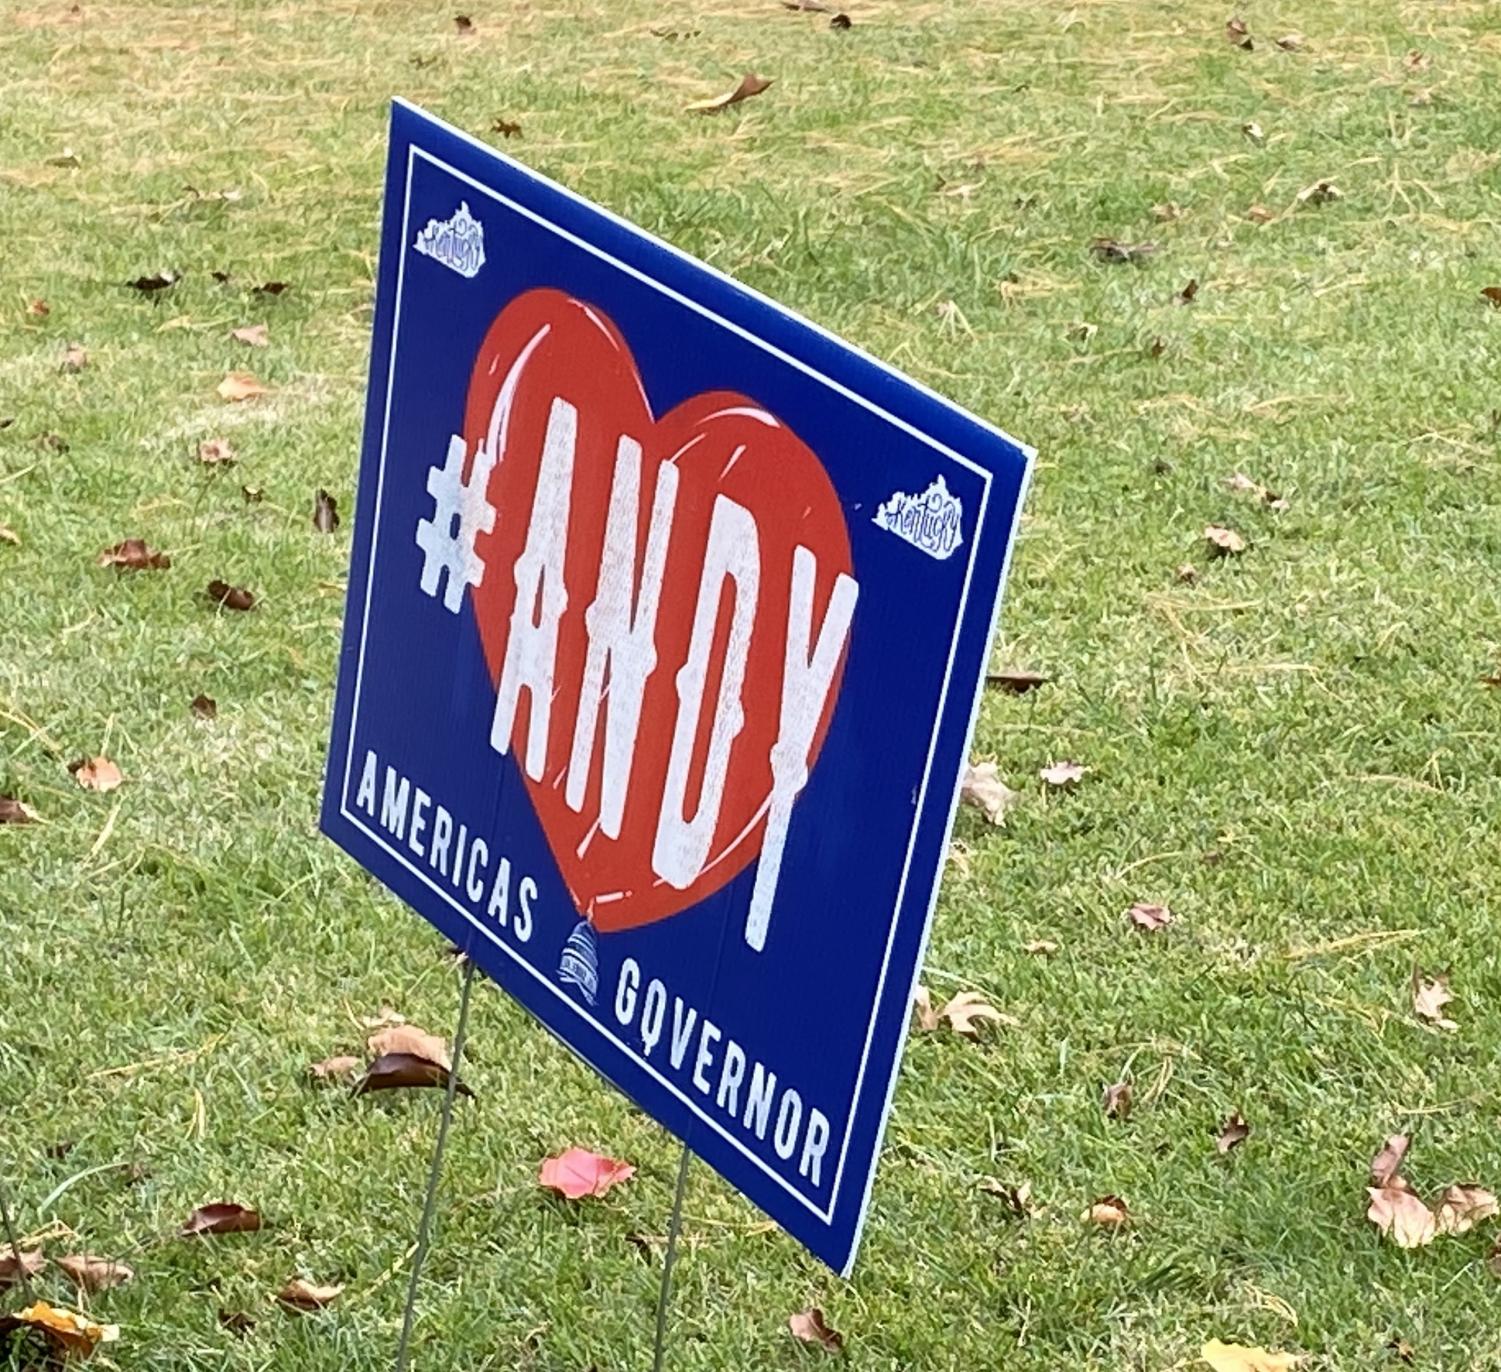 Yard+Signs+No+Longer+Just+for+Political+Candidates